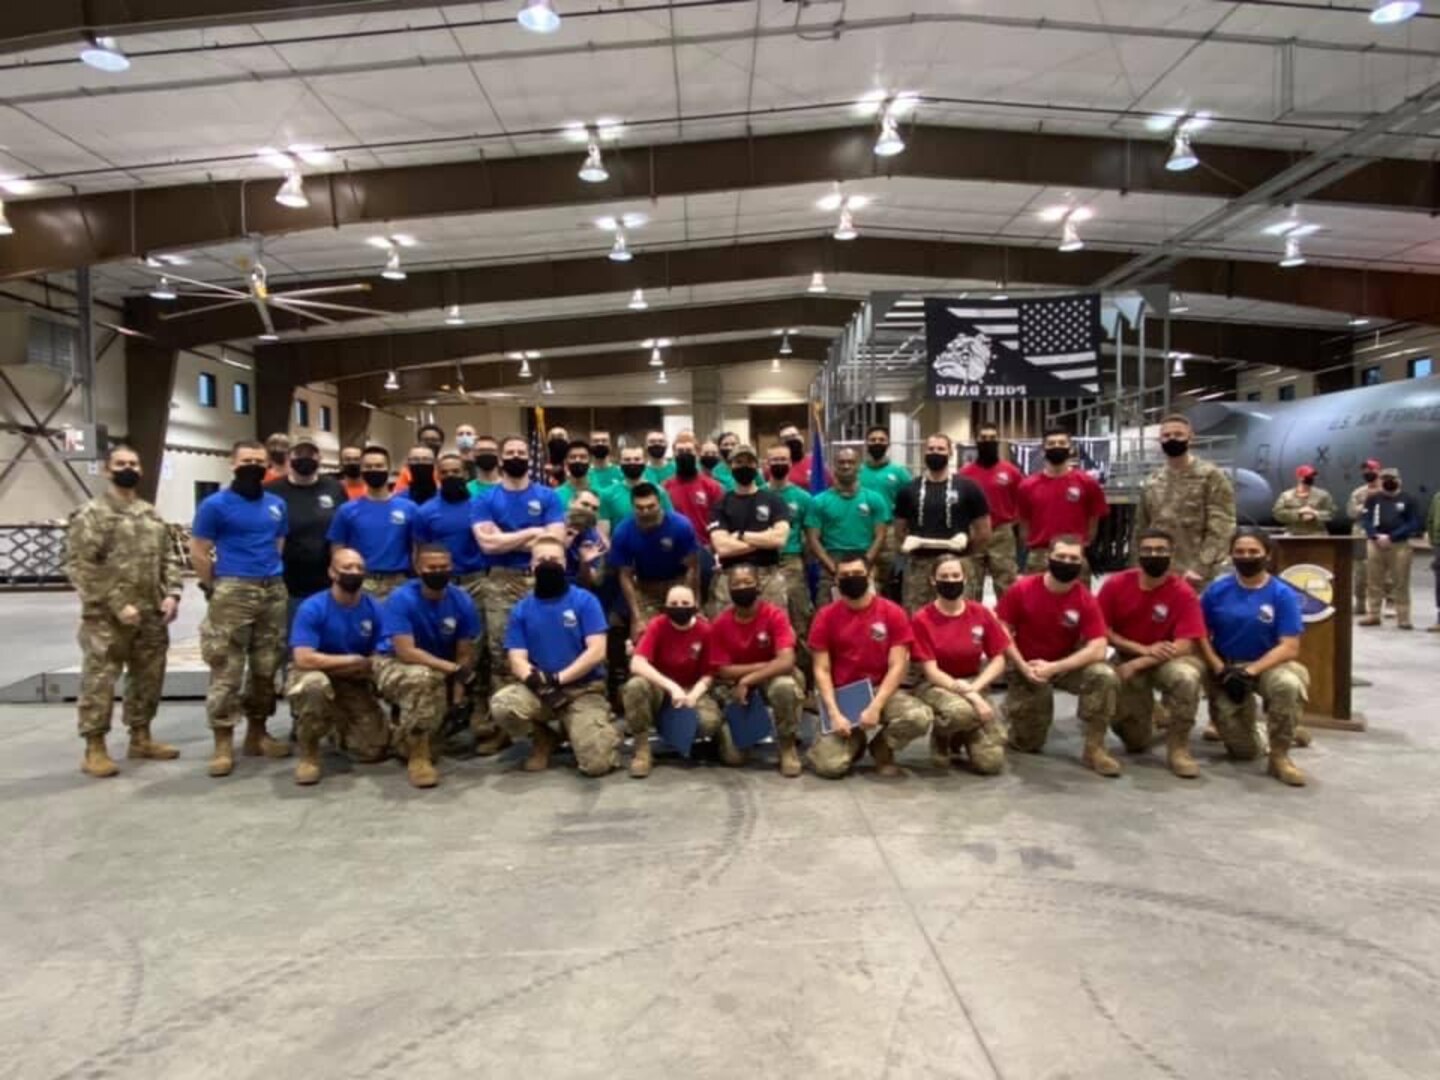 FORT LEE, Va. – Passion, pride, and community are what many organizations strive for and few achieve. The 345th Training Squadron here demonstrated these values and more Feb. 26 during the schoolhouse’s first Port Dawg Rodeo.